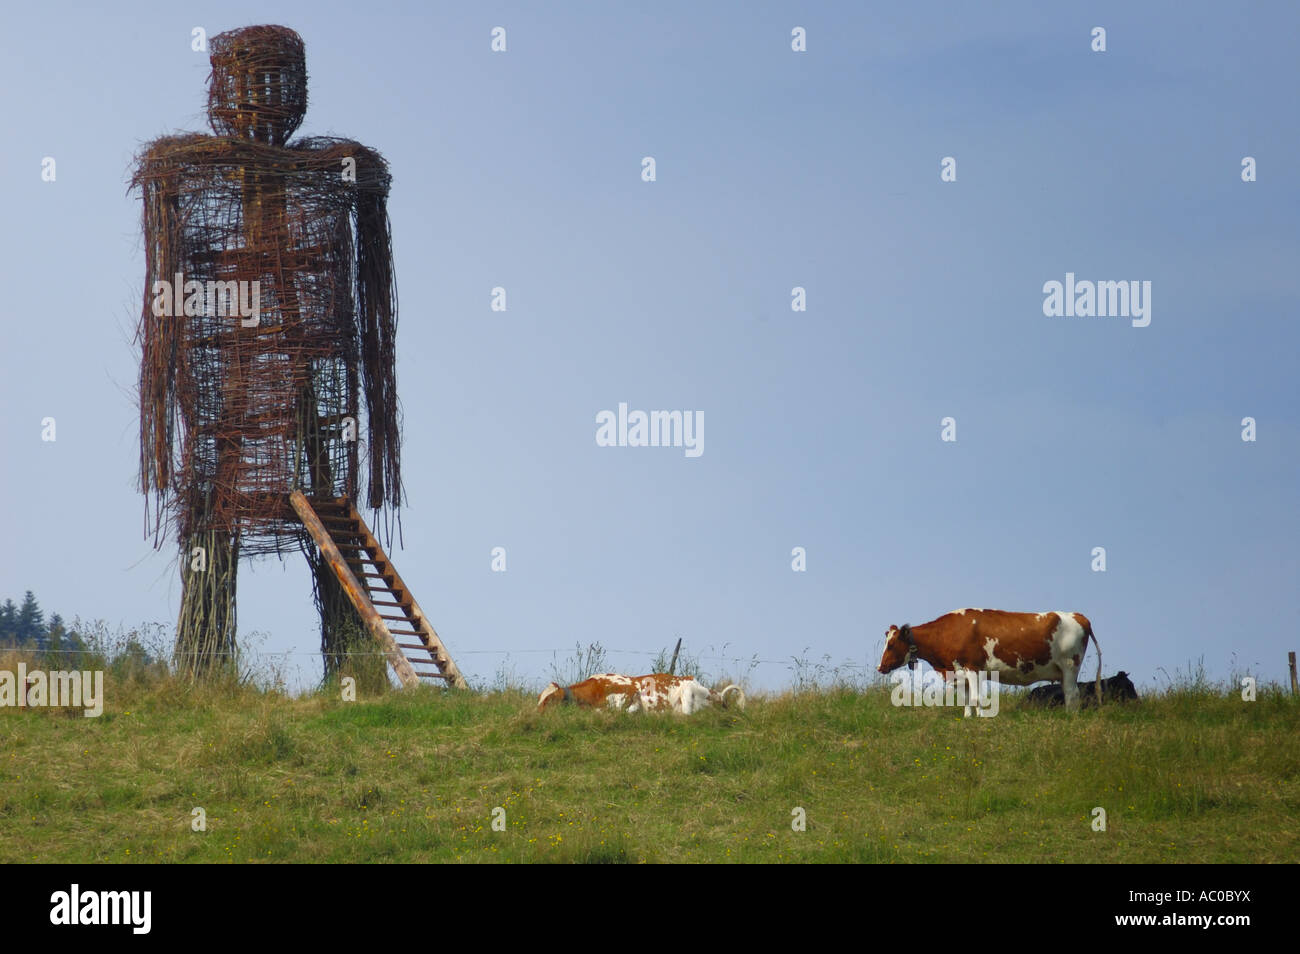 A giant wicker man looms over cows. Space for text in the clear blue sky. Stock Photo